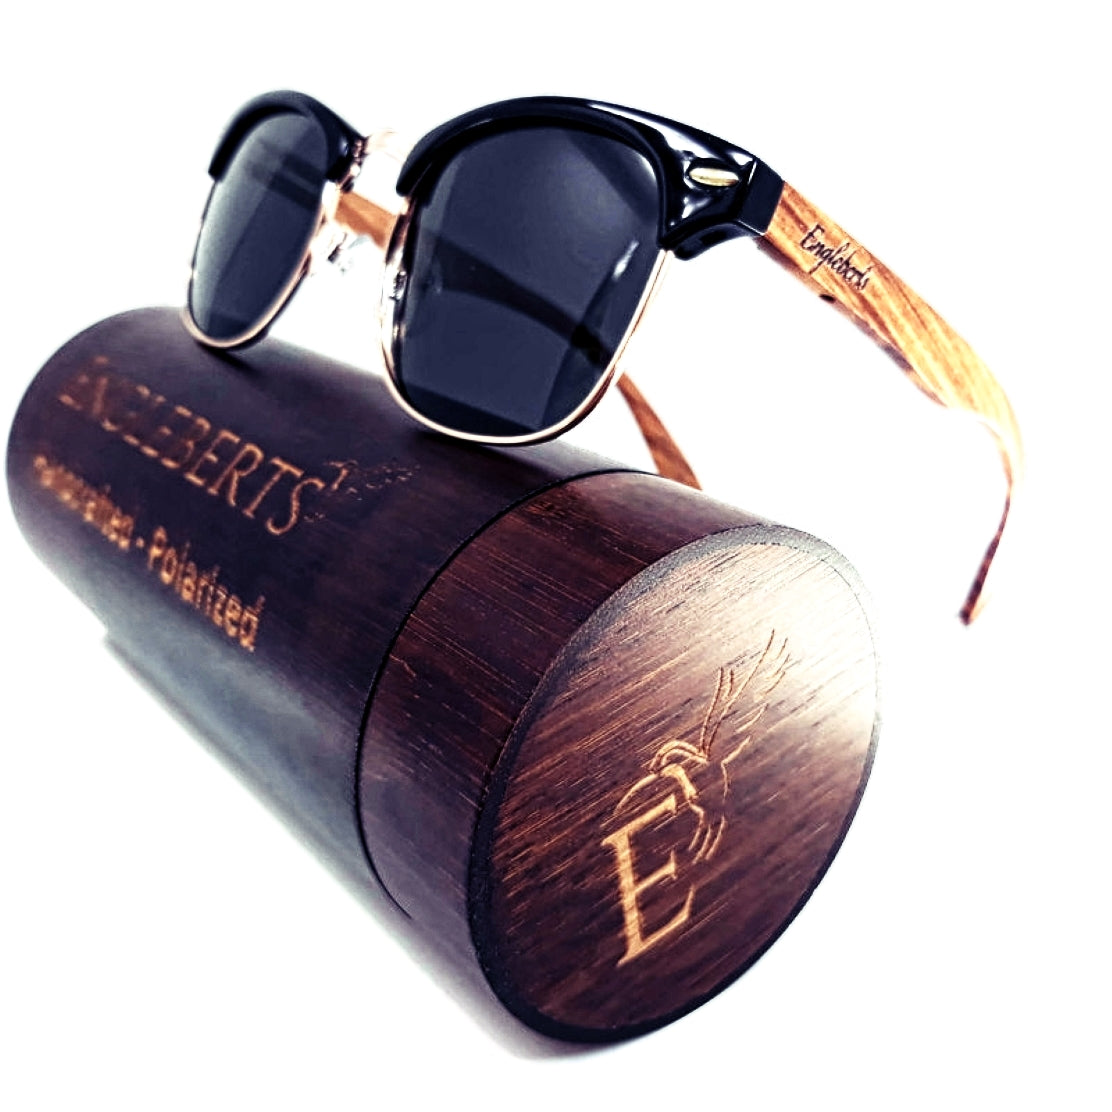 Walnut Wood Classic Style Sunglasses with Black Lenses